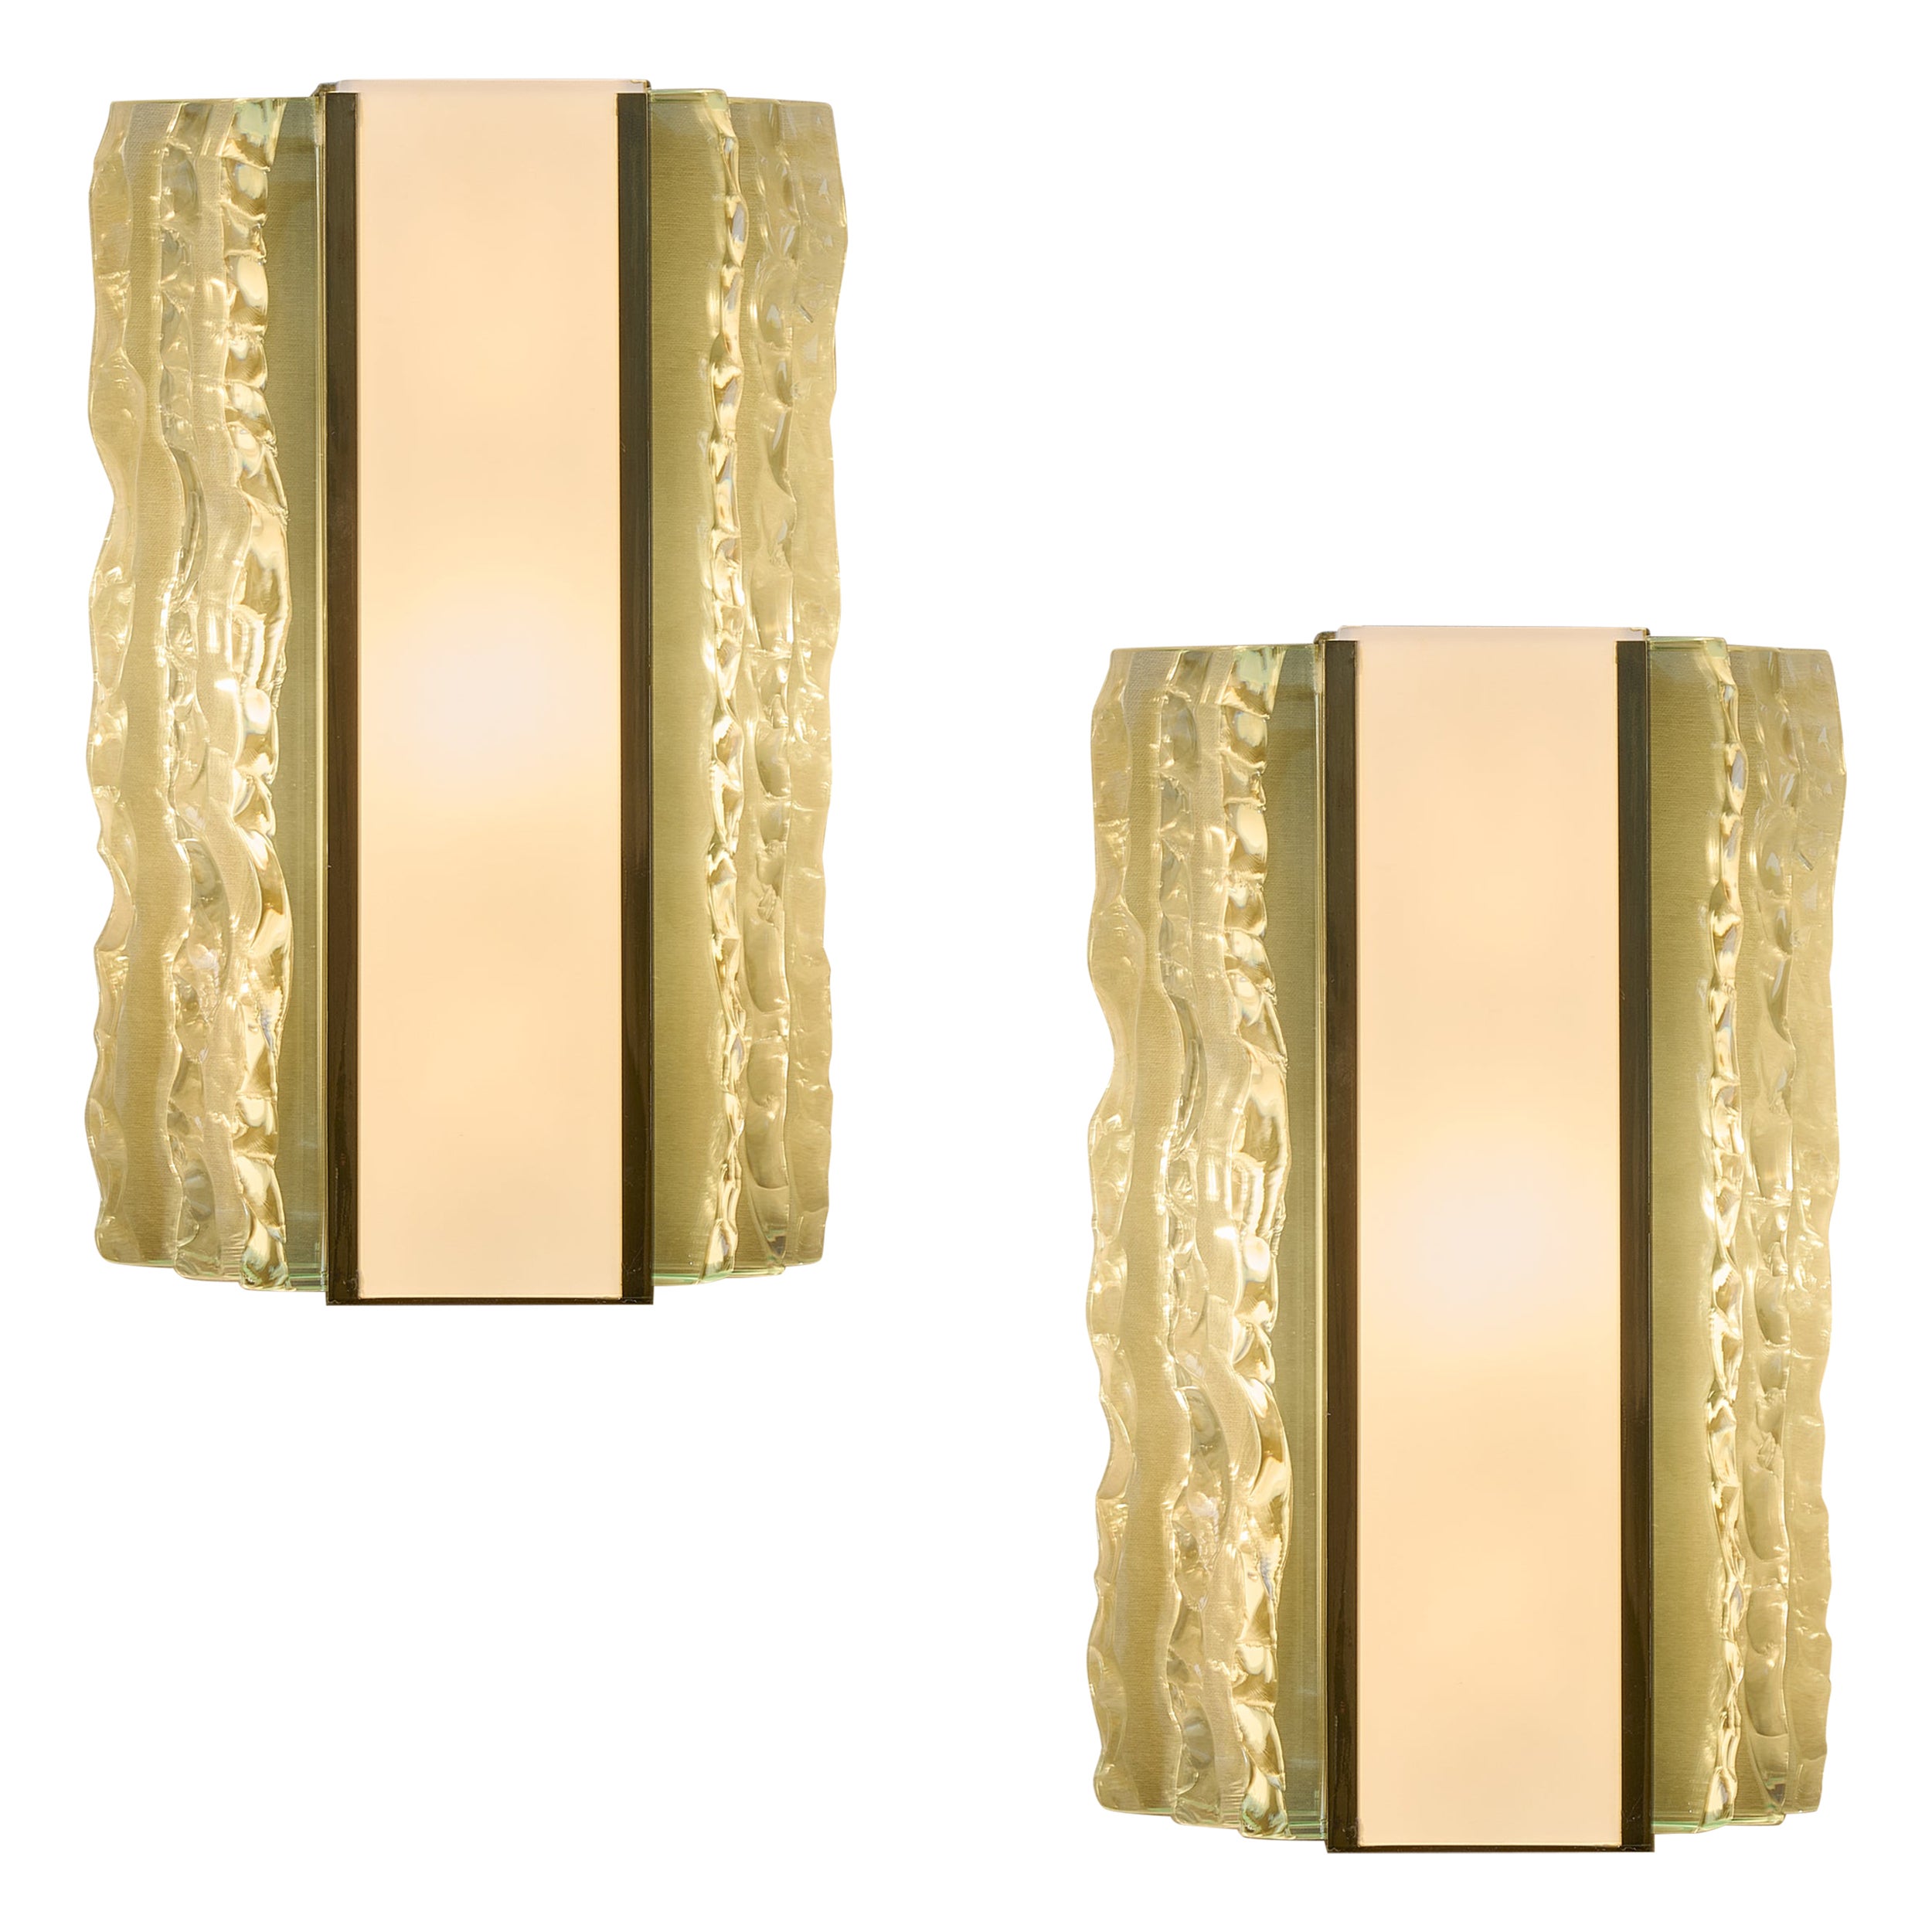 Max Ingrand for Fontana Arte: Pair of Cut Crystal and Brass Sconces, Italy 1954 For Sale